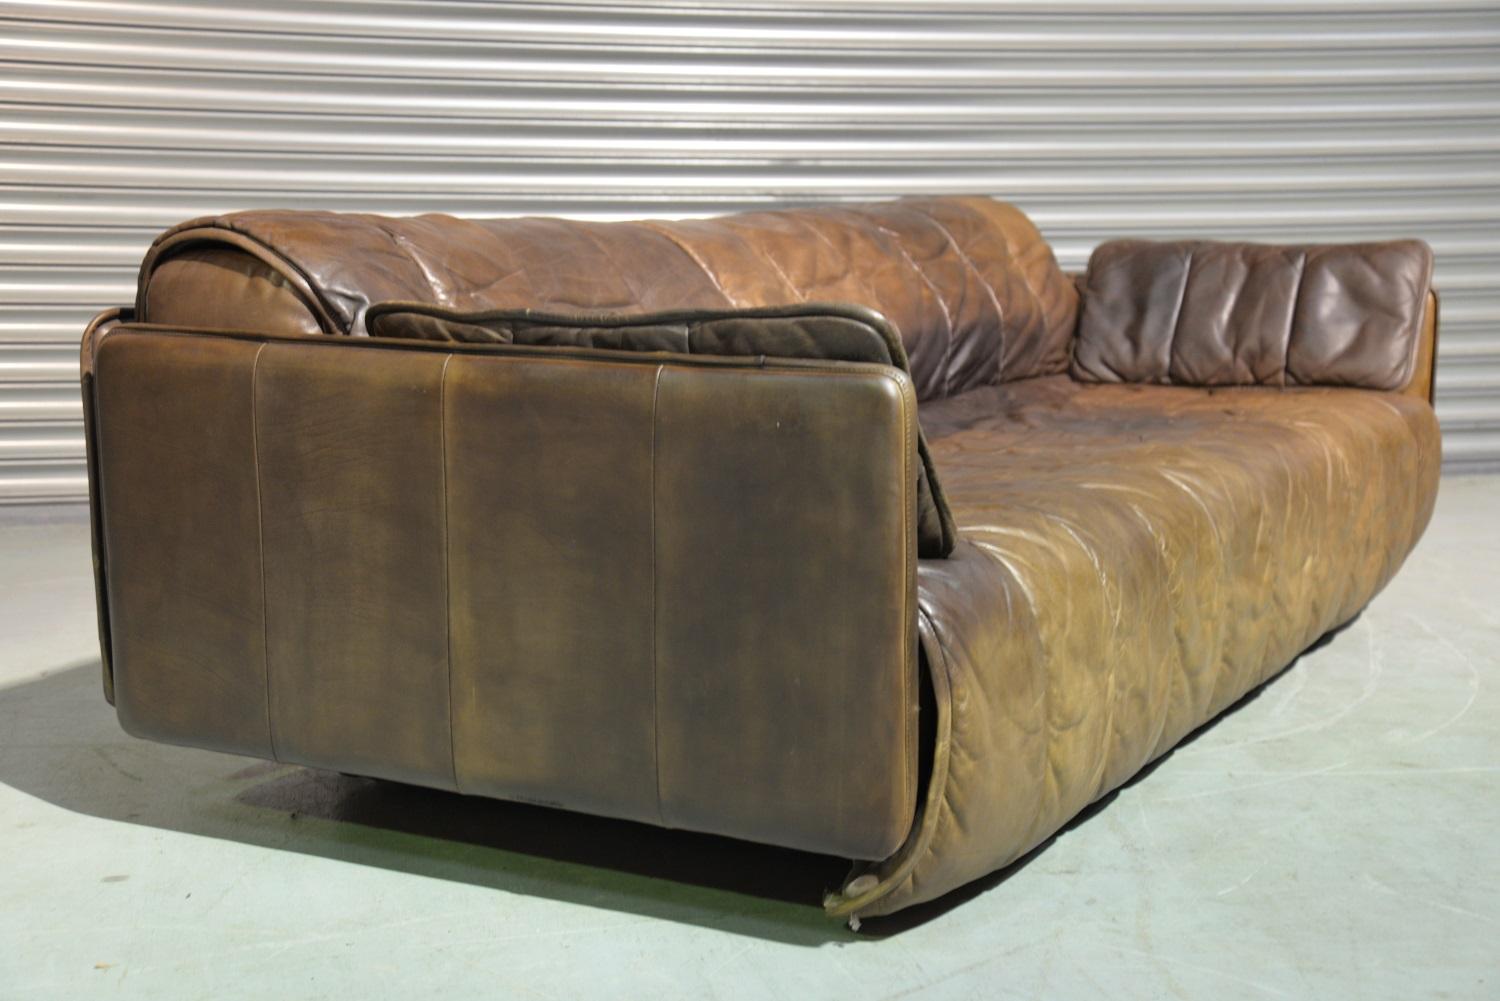 Swiss Vintage De Sede Patchwork Leather Sofa / Daybed, Switzerland 1970s For Sale